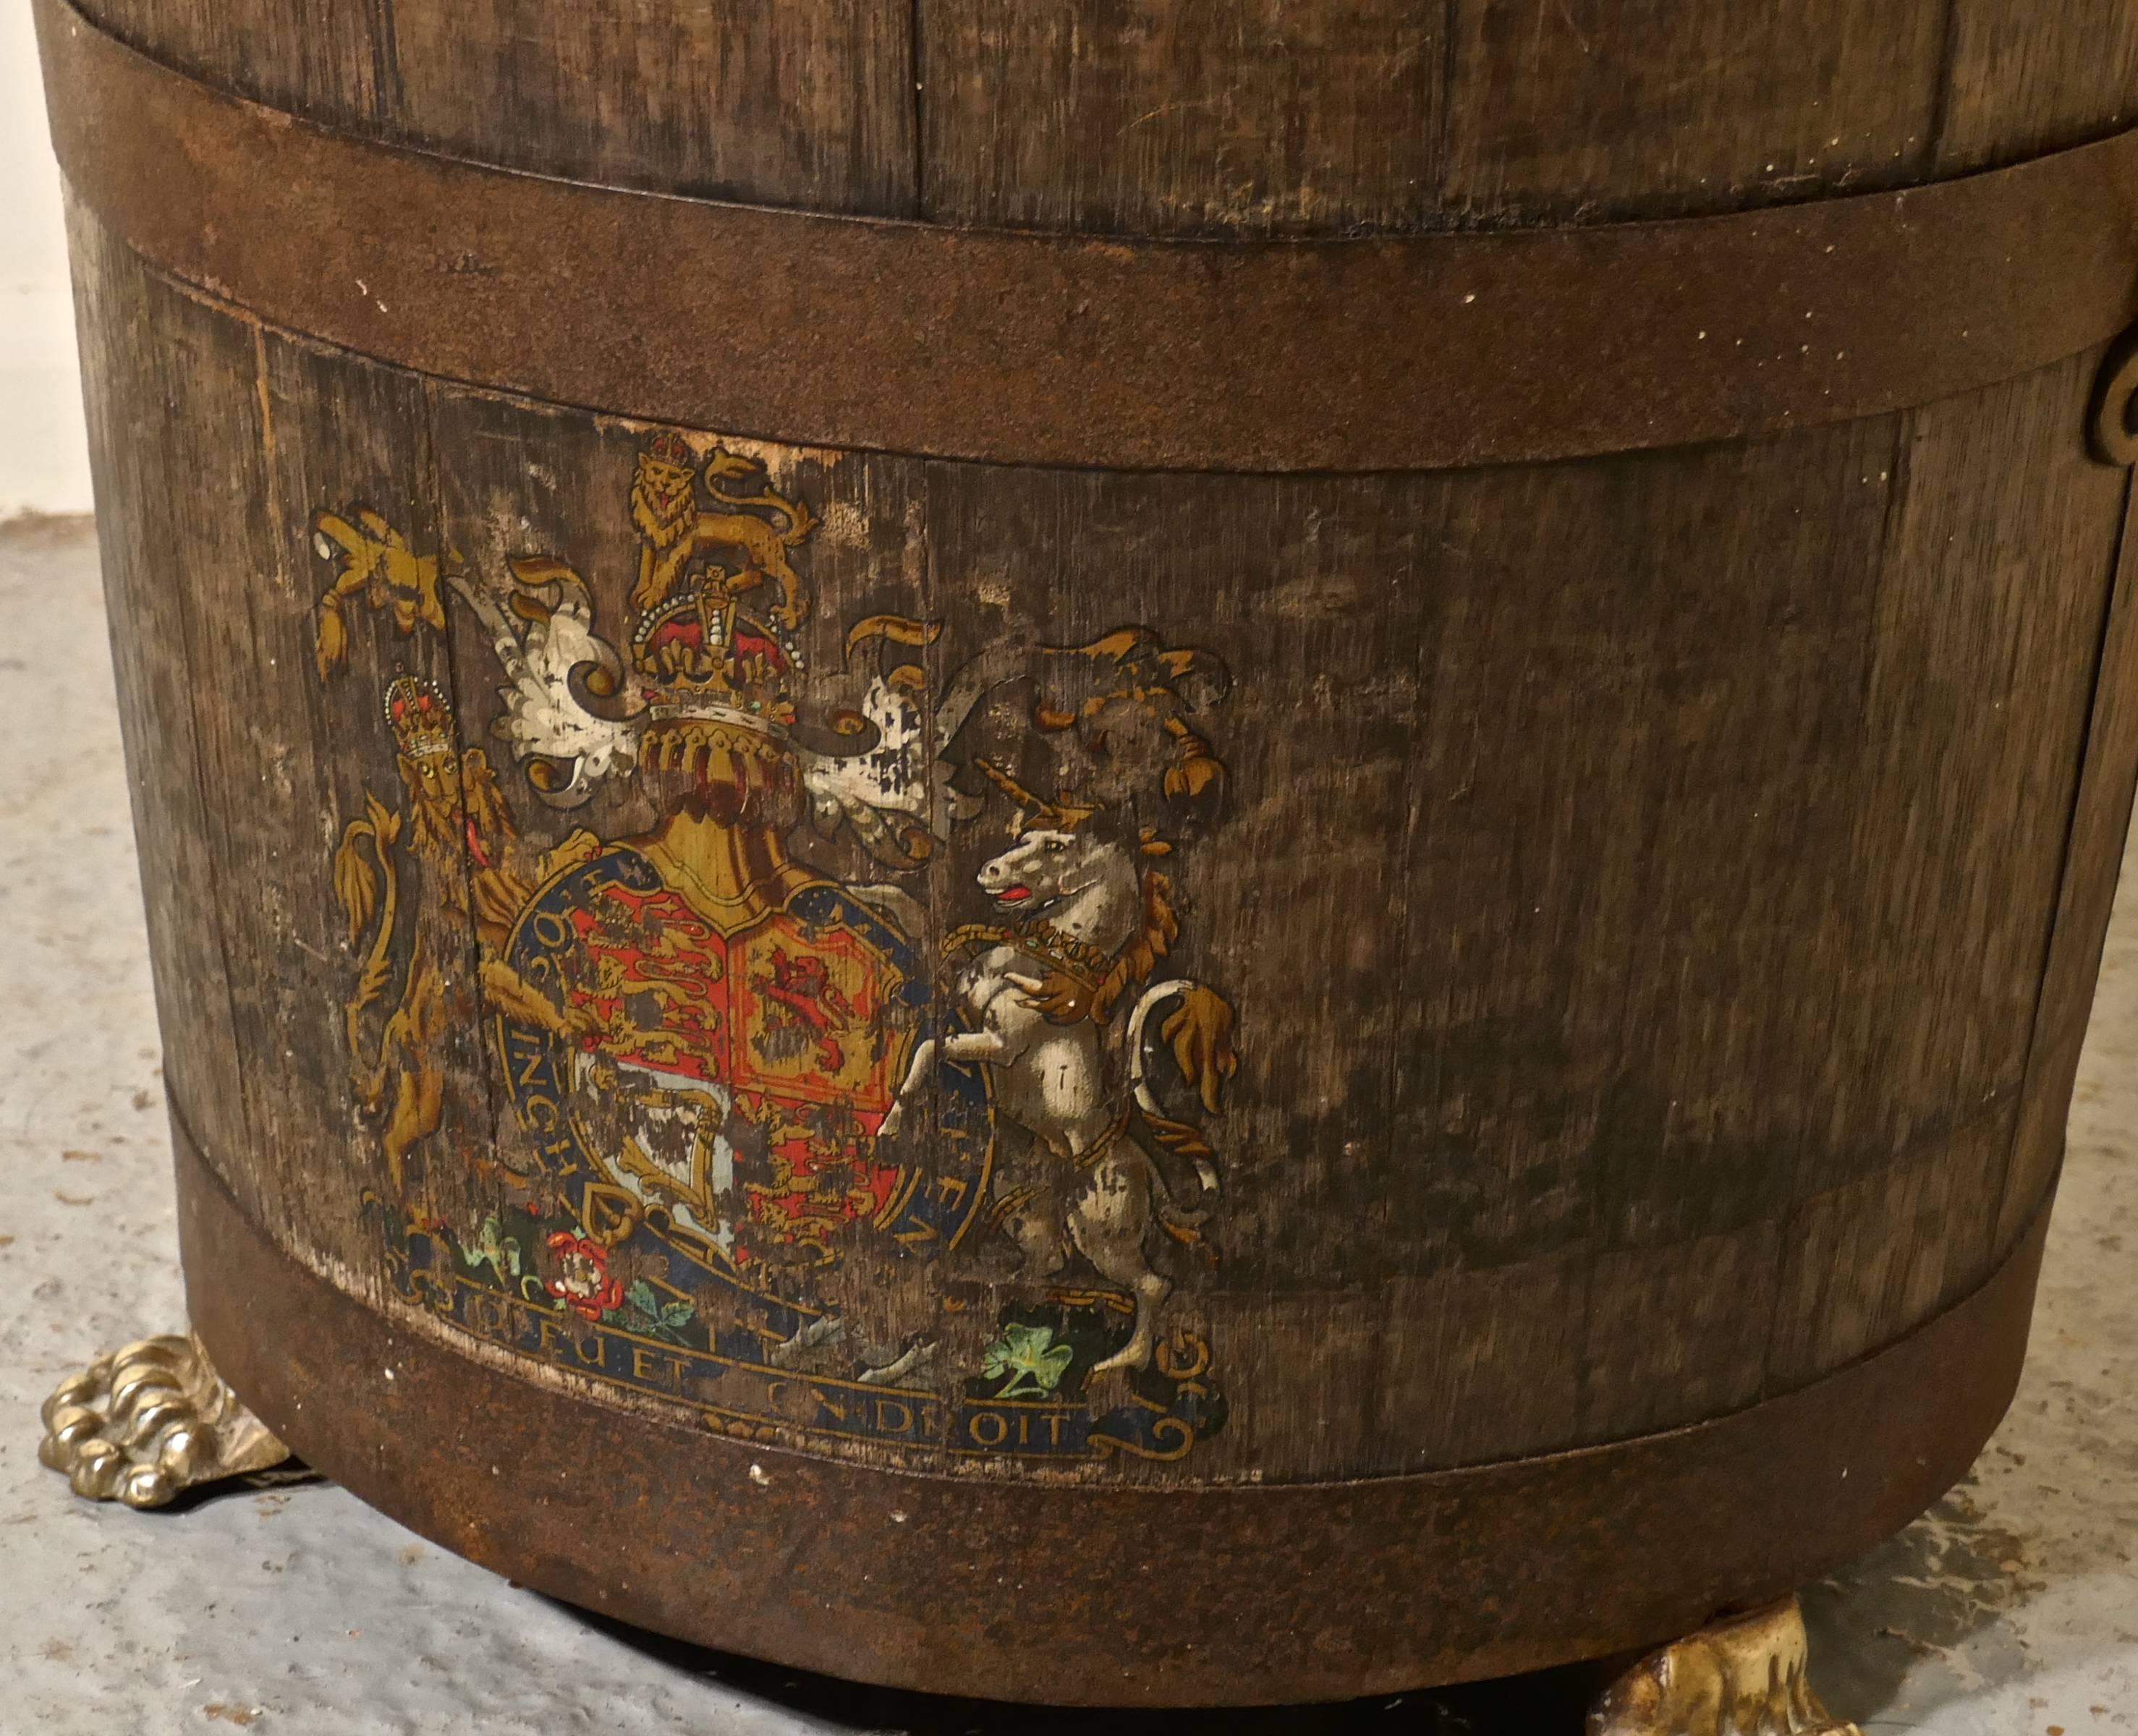 An oak iron bound ships barrel, with the royal coat of arms

This lovely old piece it is made in oak and decorated with the royal coat of arms, the barrel stands in three small brass hairy paw feet and it has brass carrying handles
The barrel